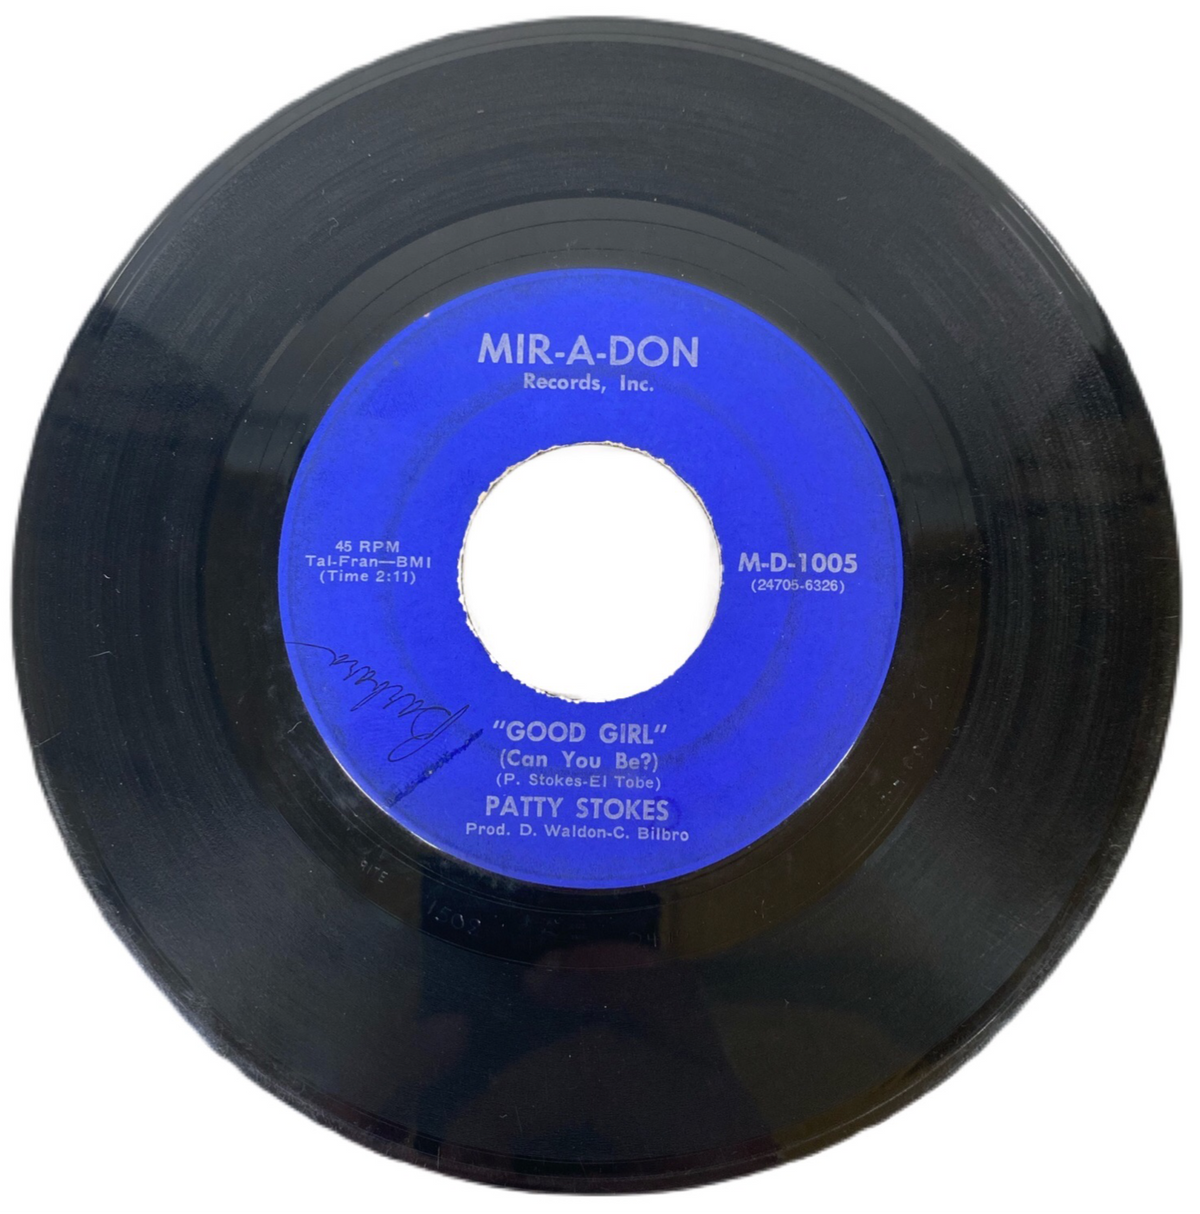 Patty Stokes “Good Girl (Can You be?)” 45